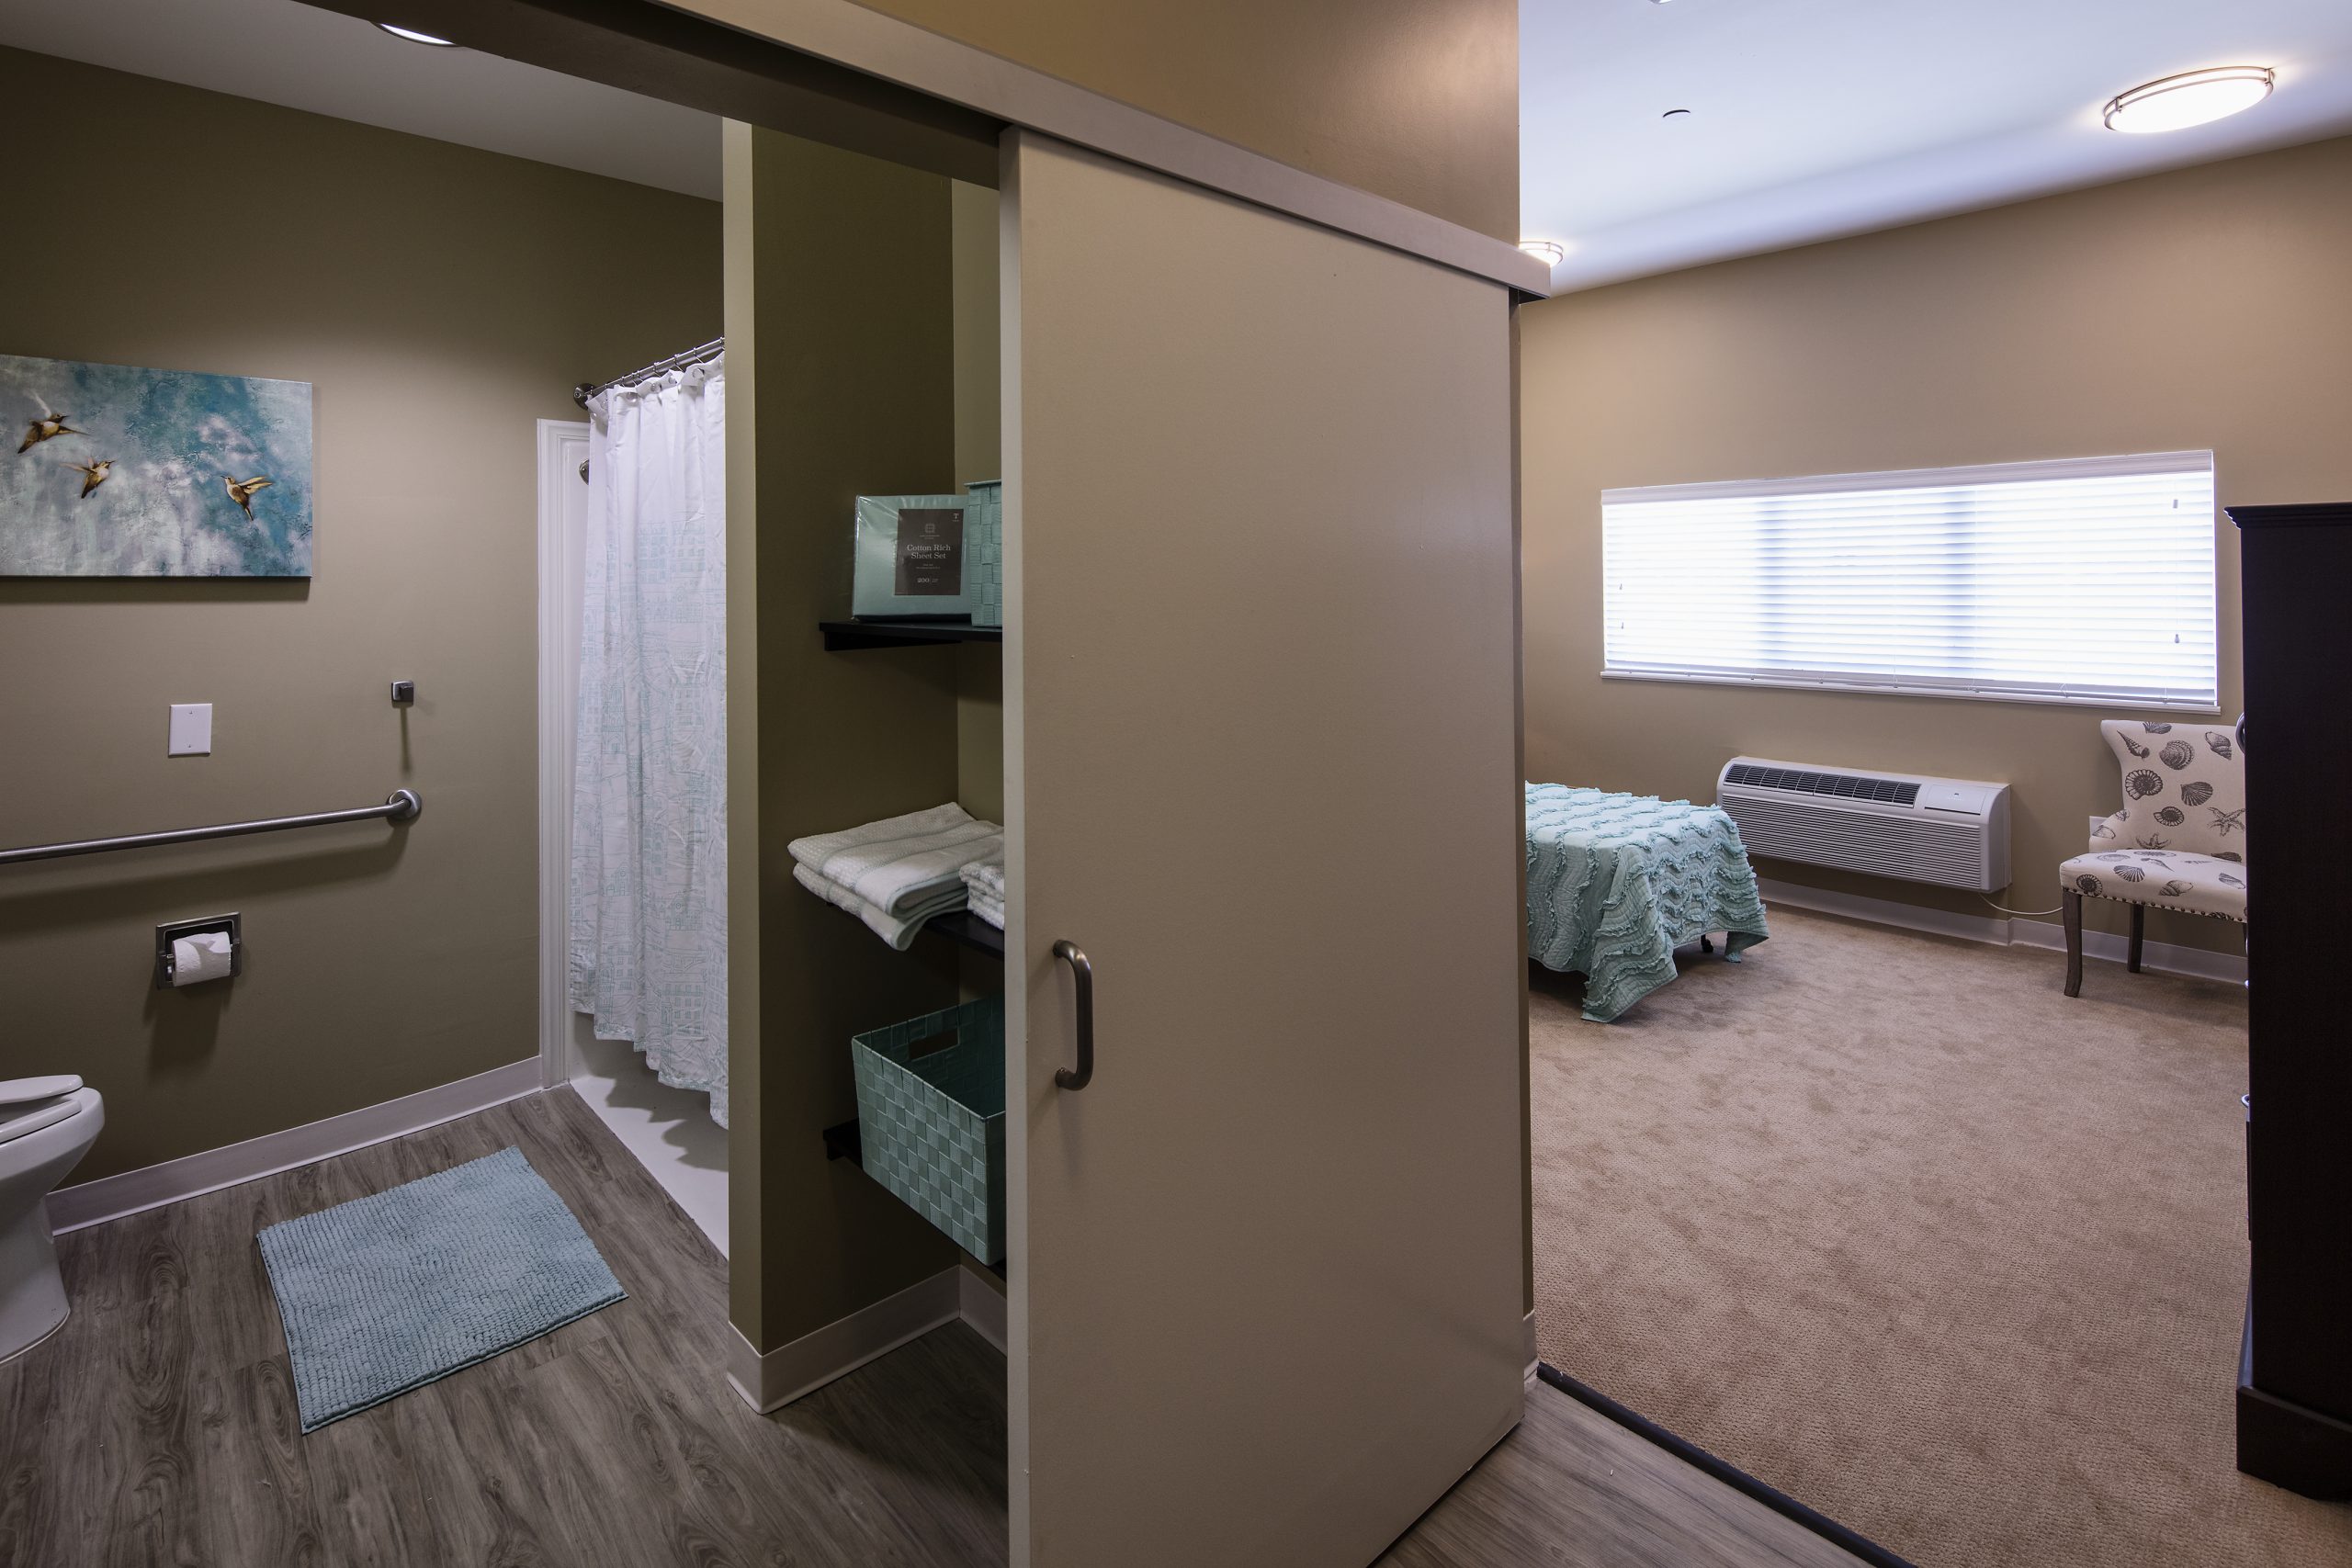 Personal room and private bathroom with pocket doors